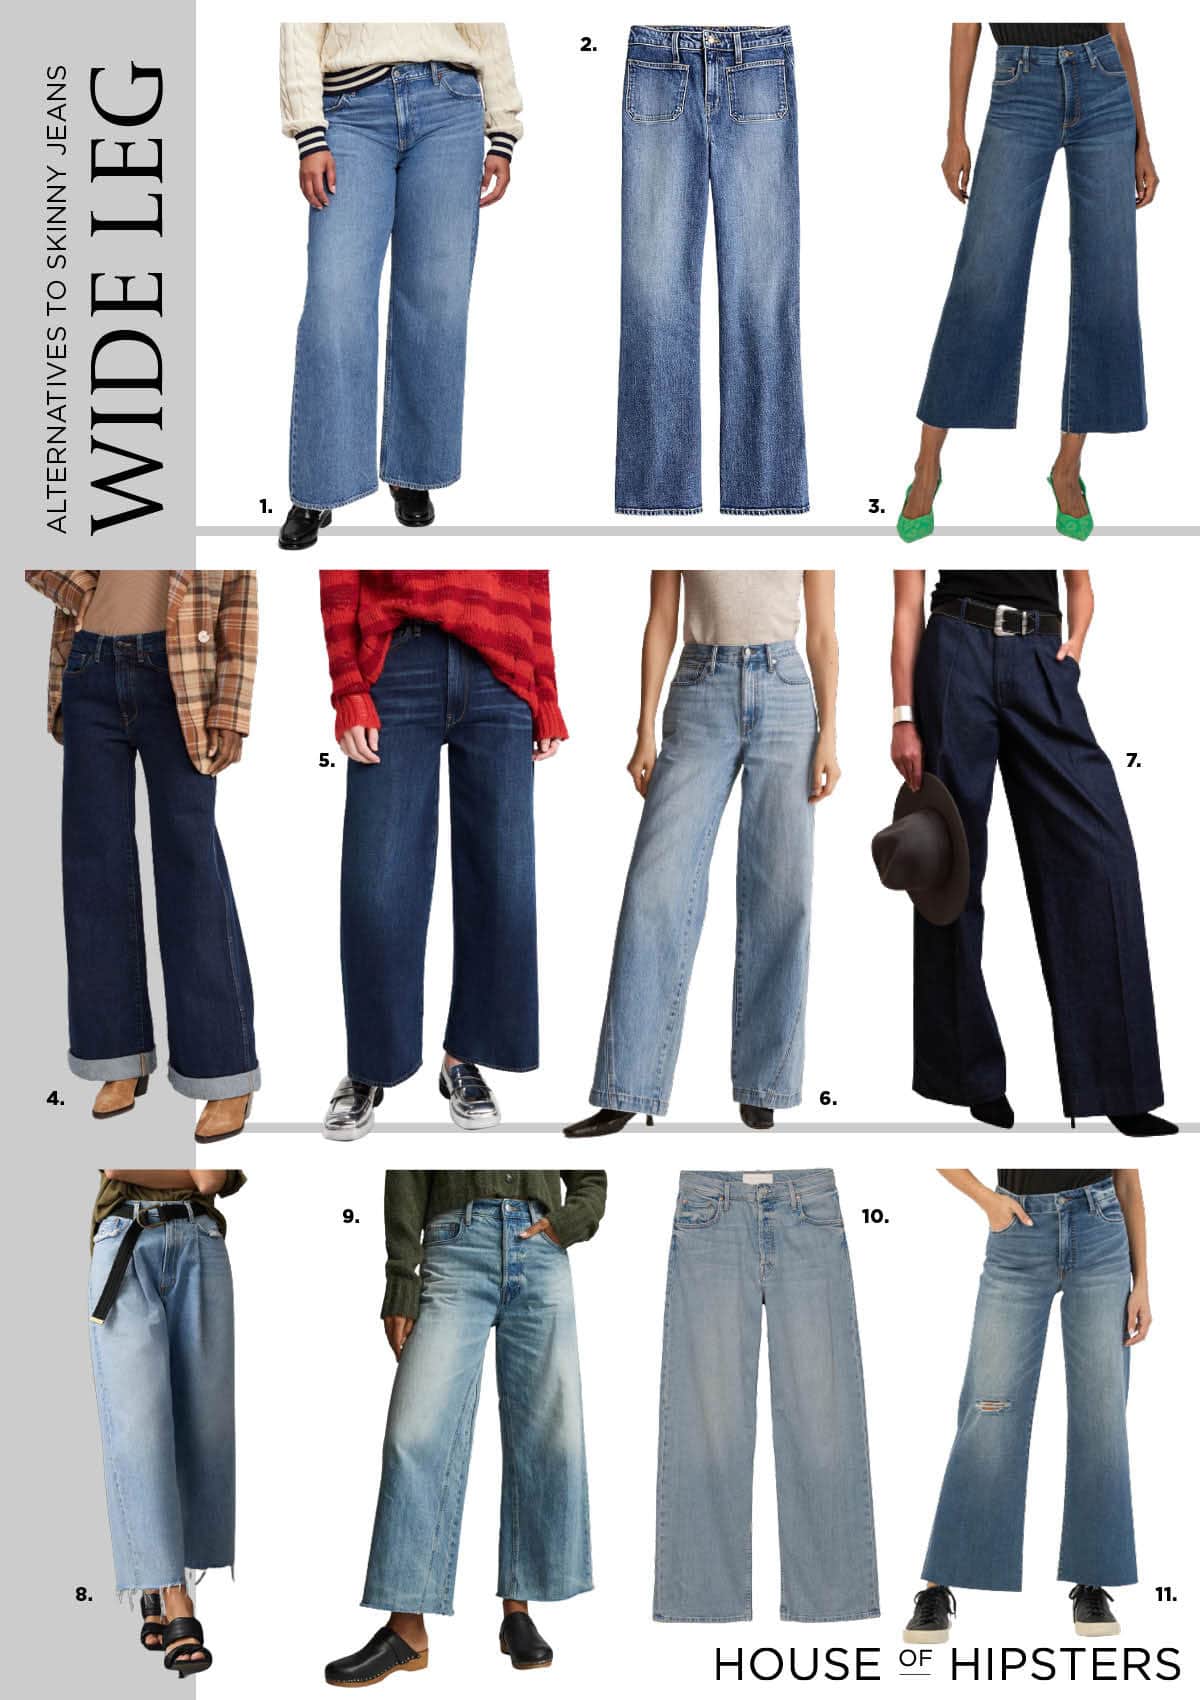 Skinny jeans are out of style. Here are wide leg jean alternatives.